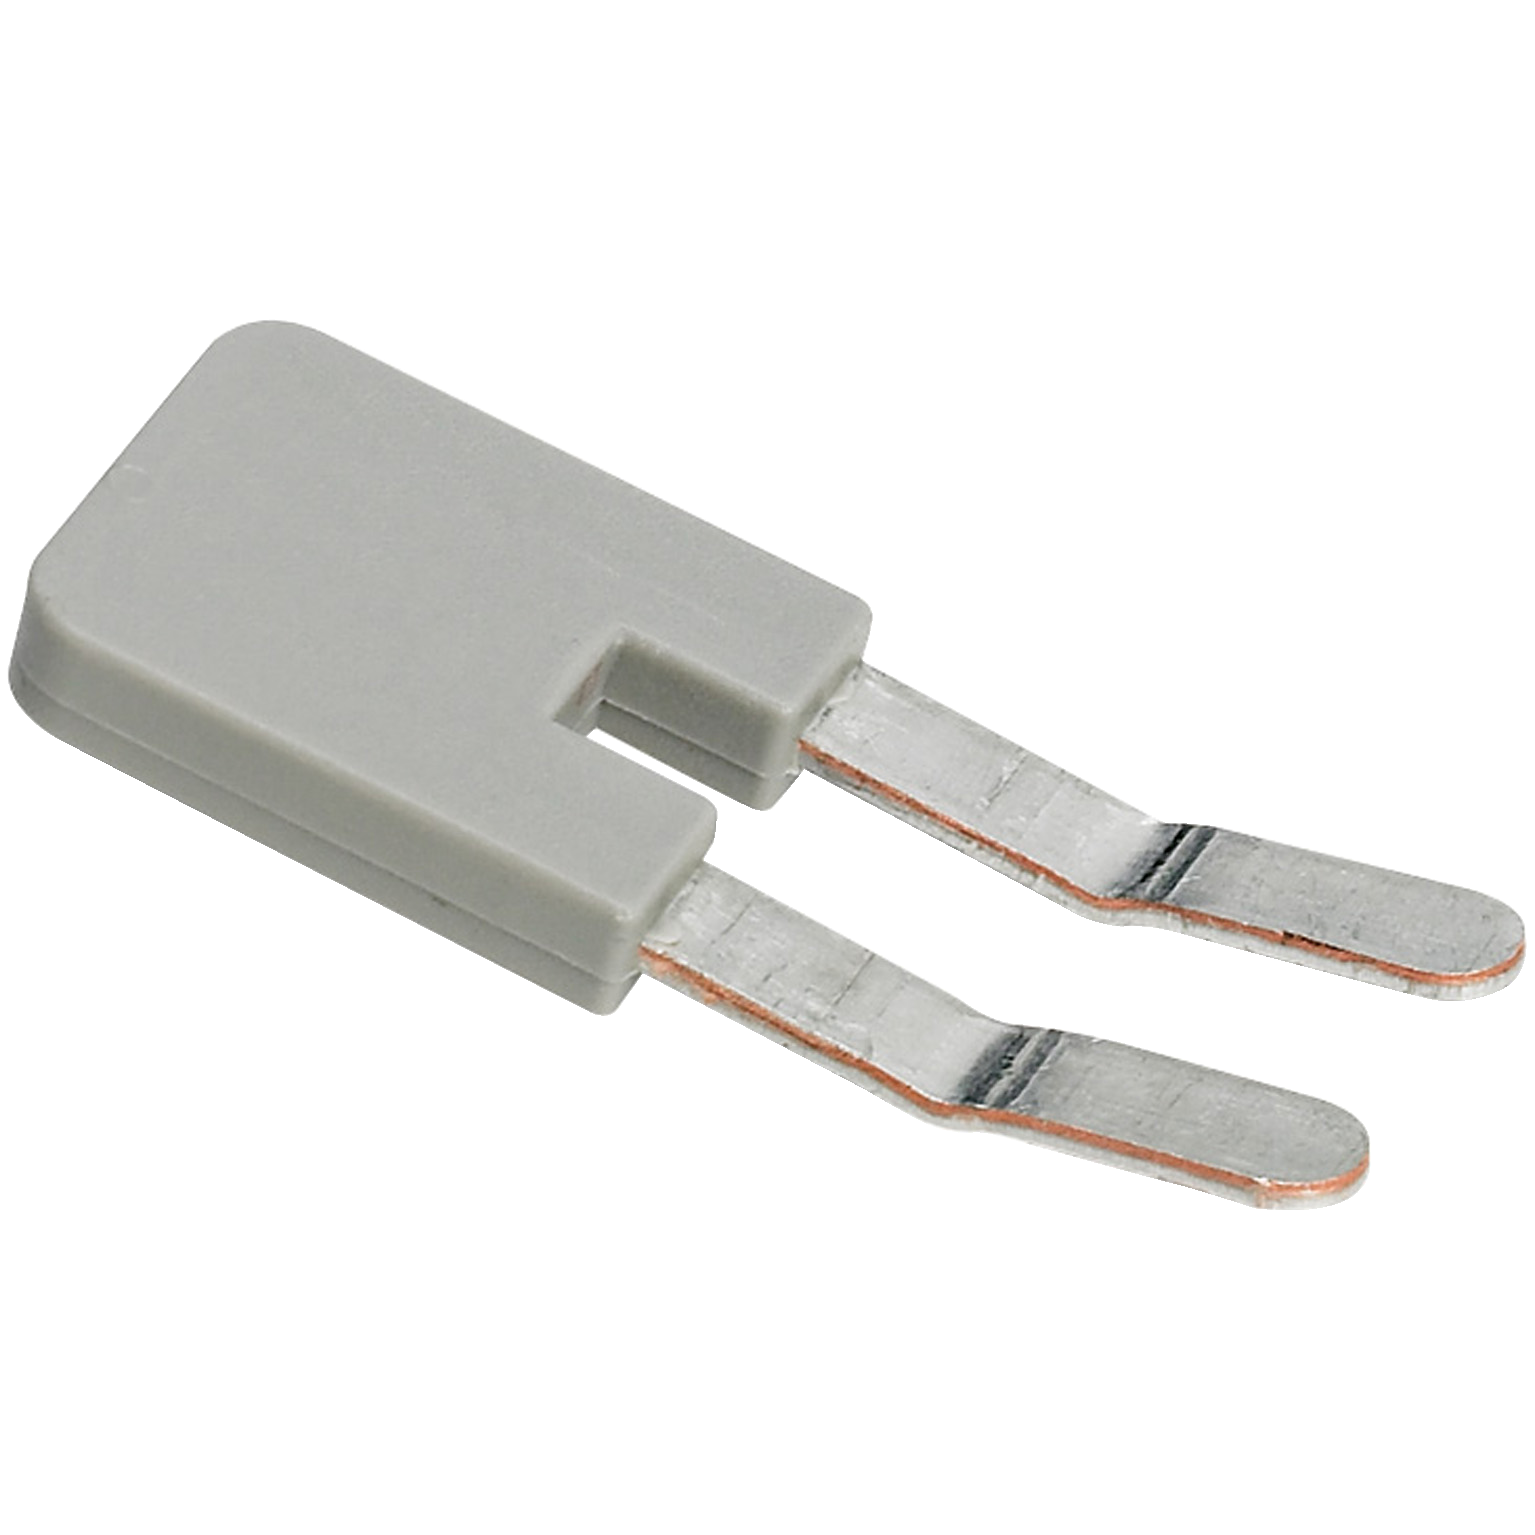 Plug-in bridge, Linergy TR, 2 points, for mini spring terminals NSYTRR24M, 2 way, grey, set of 10